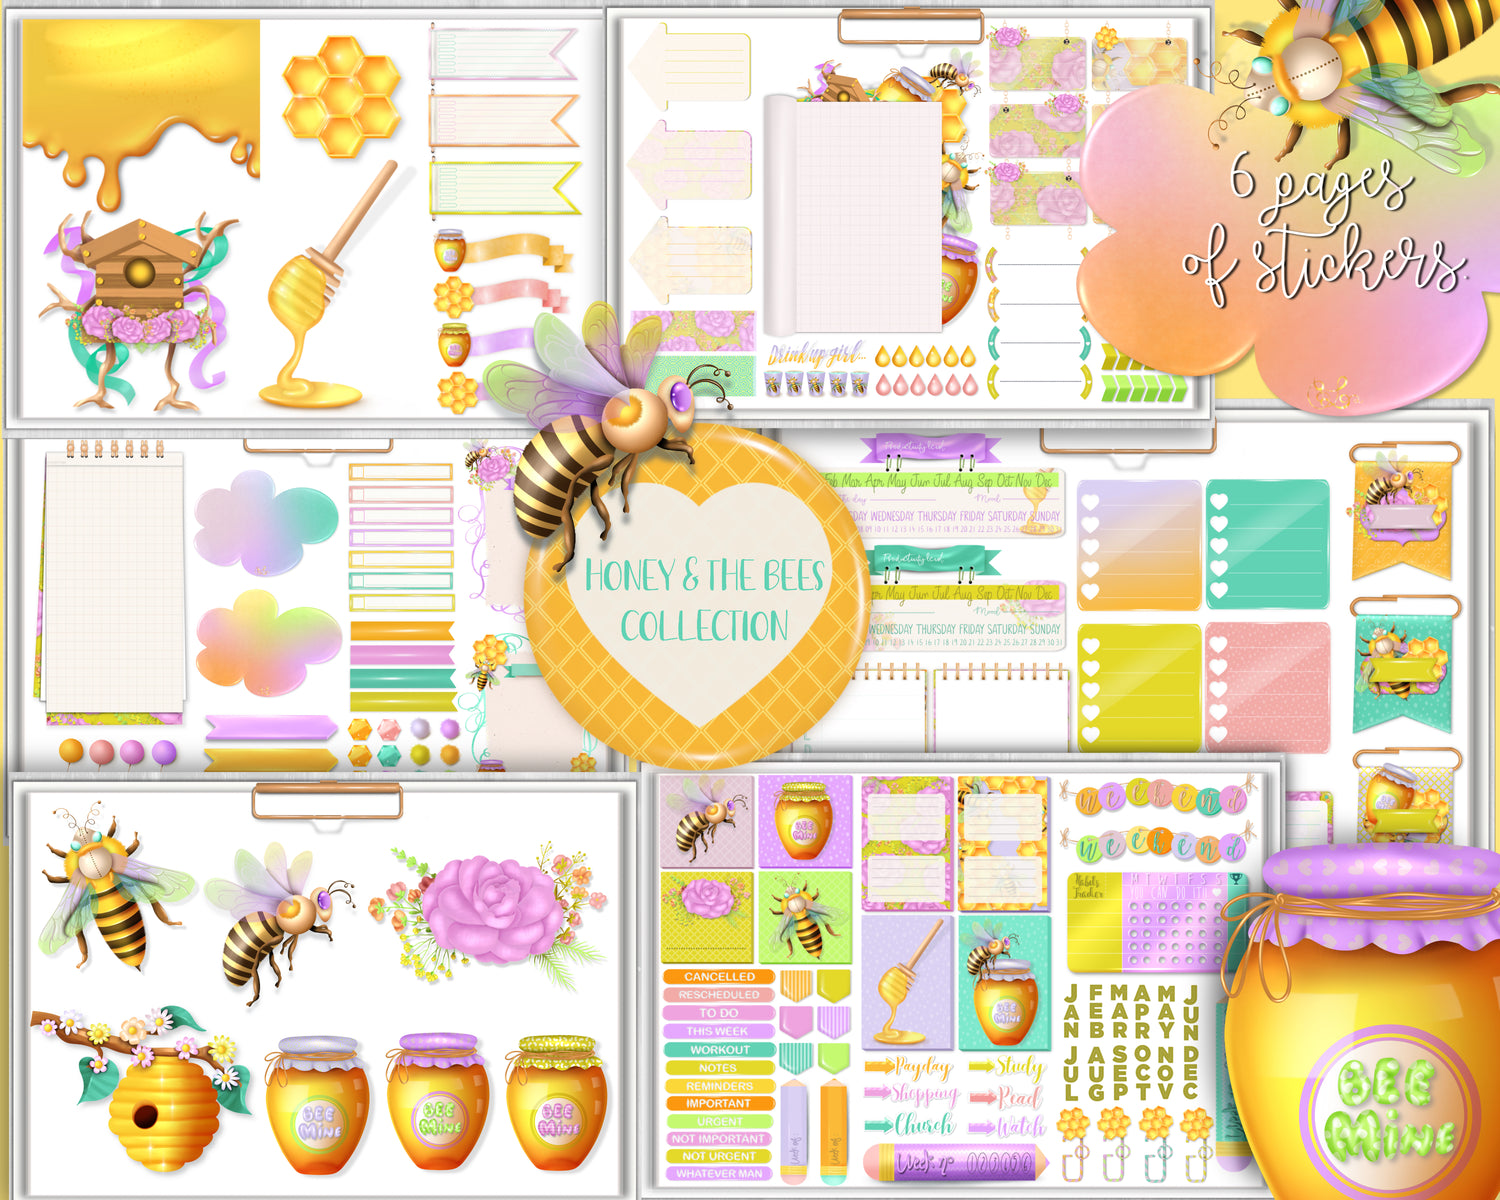 Honey and Bees Collection